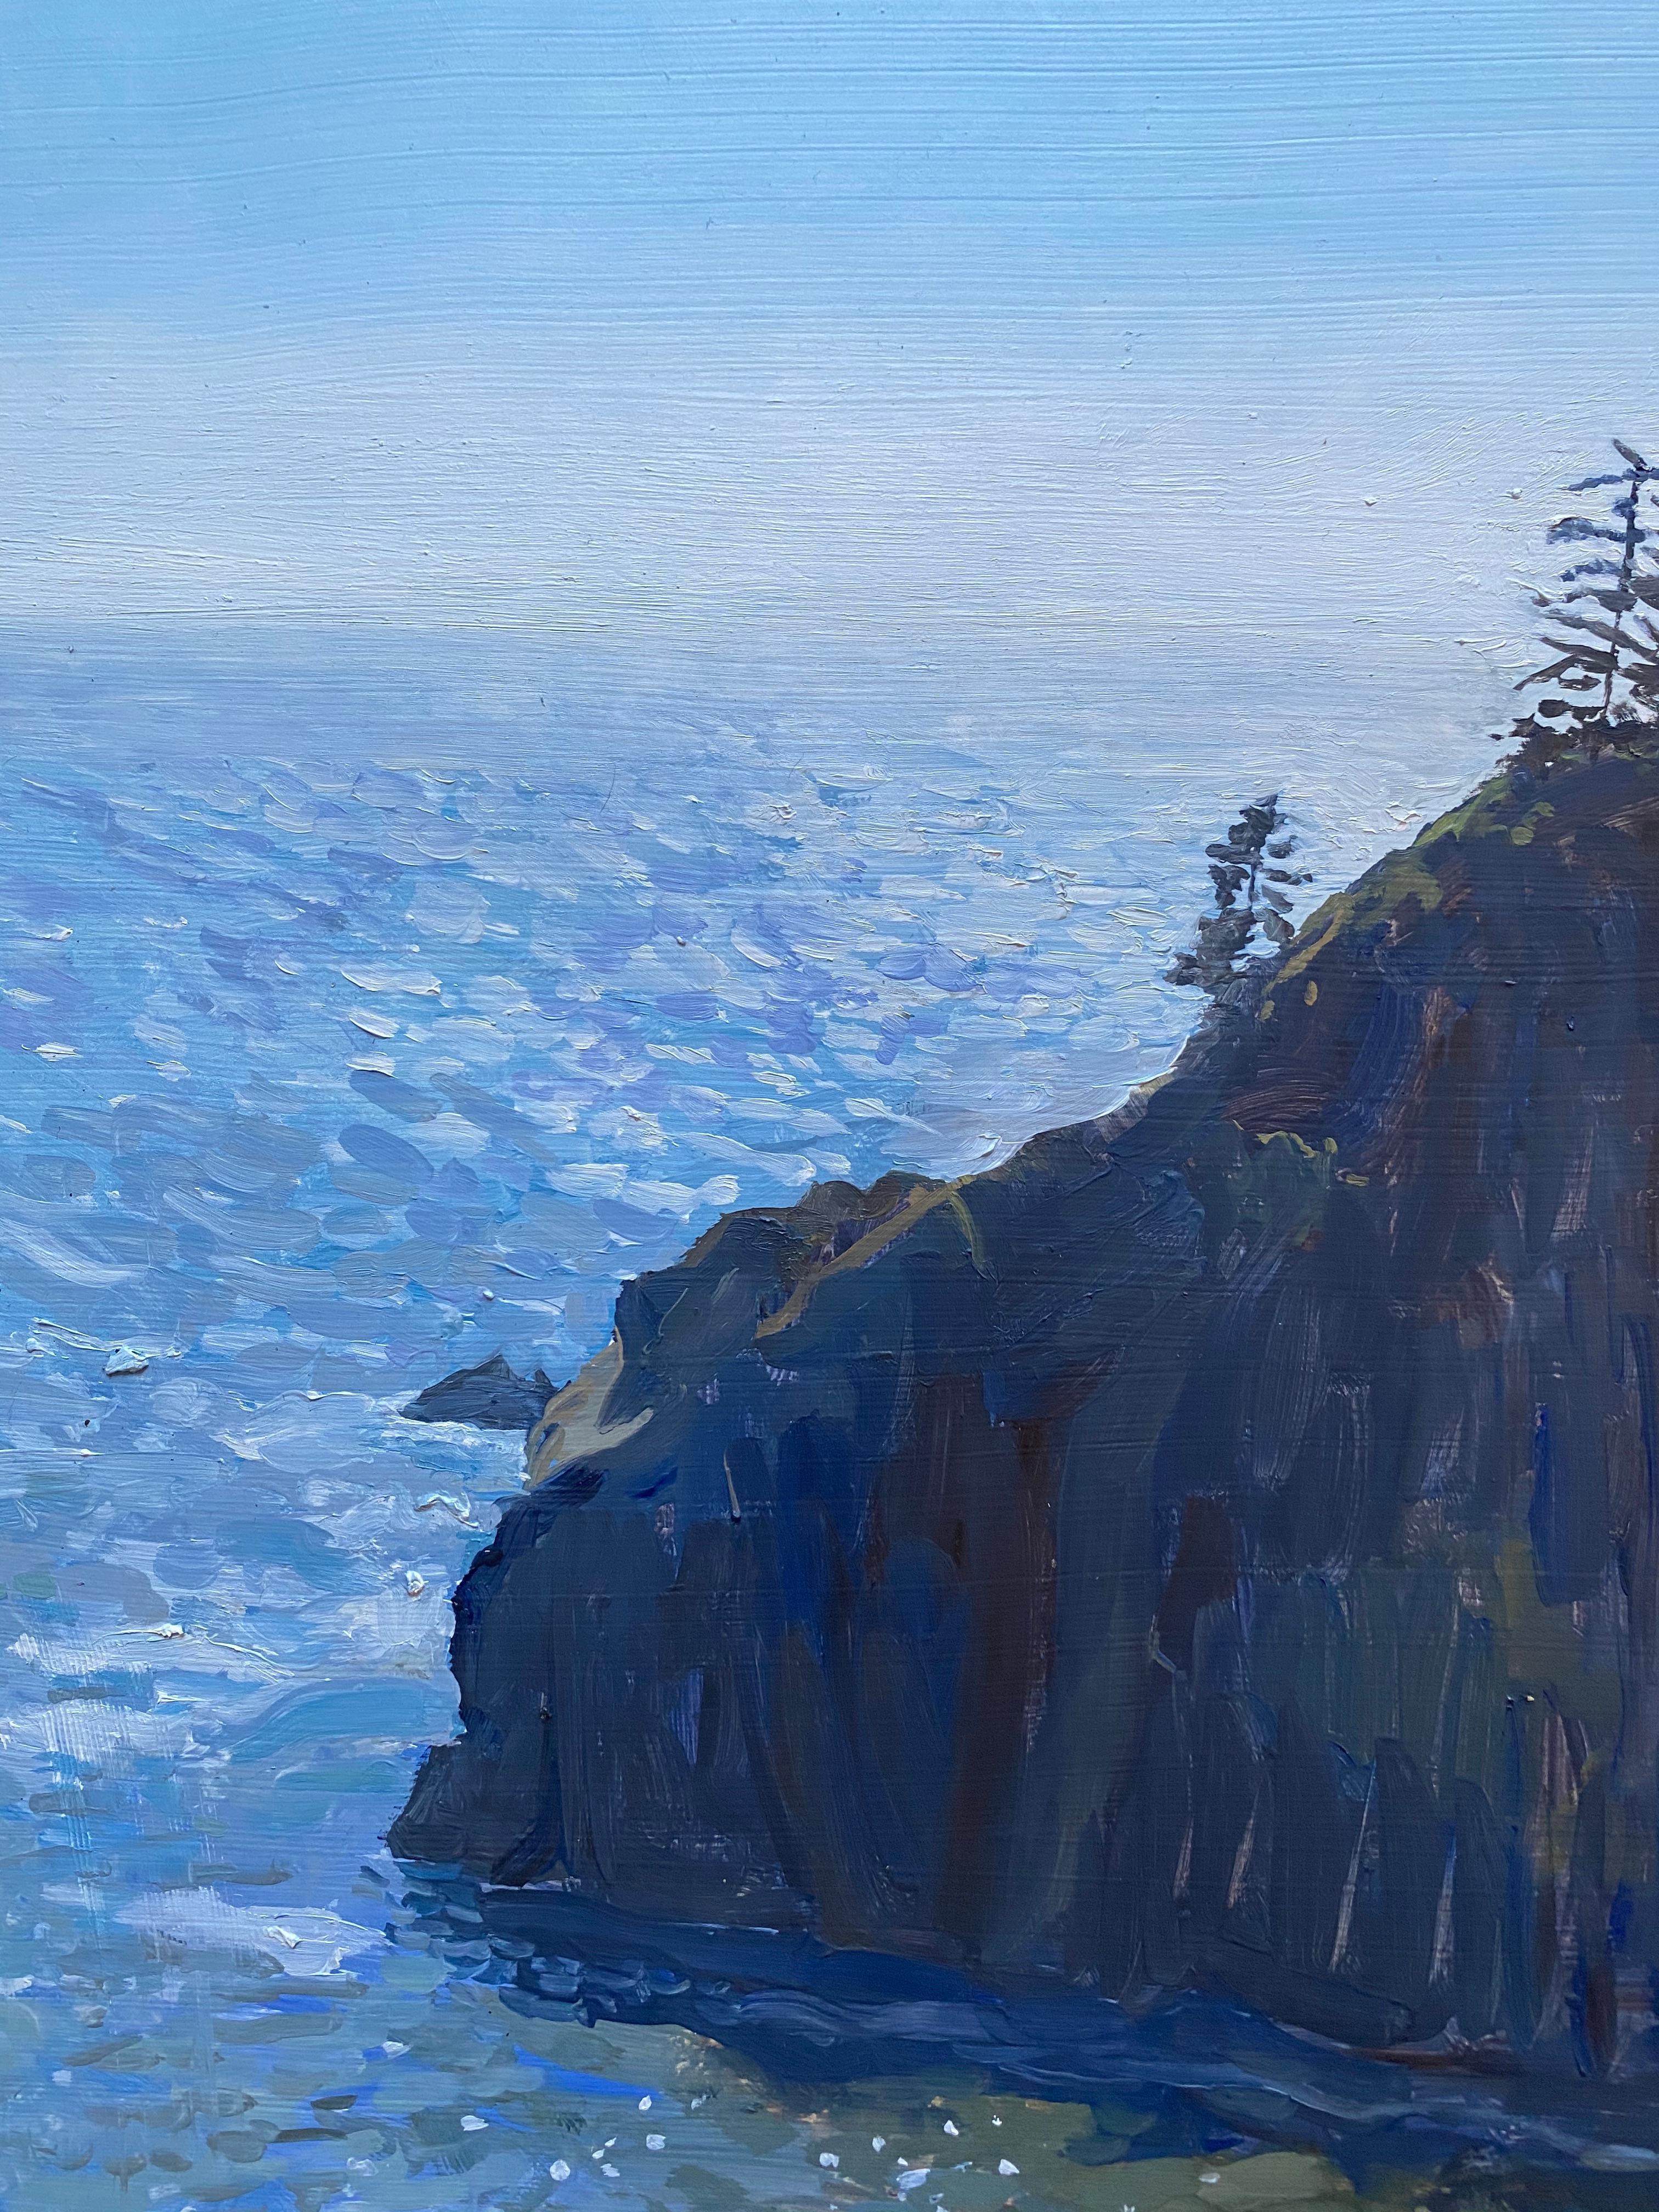 Painted en plein air, on the coast of Oregon. A beautiful natural structure, a large arched rock, scattered with trees atop the perch.


Artist Bio
Rachel Personett was born in Hawaii, but raised in Colorado. Being the daughter of a pilot she has